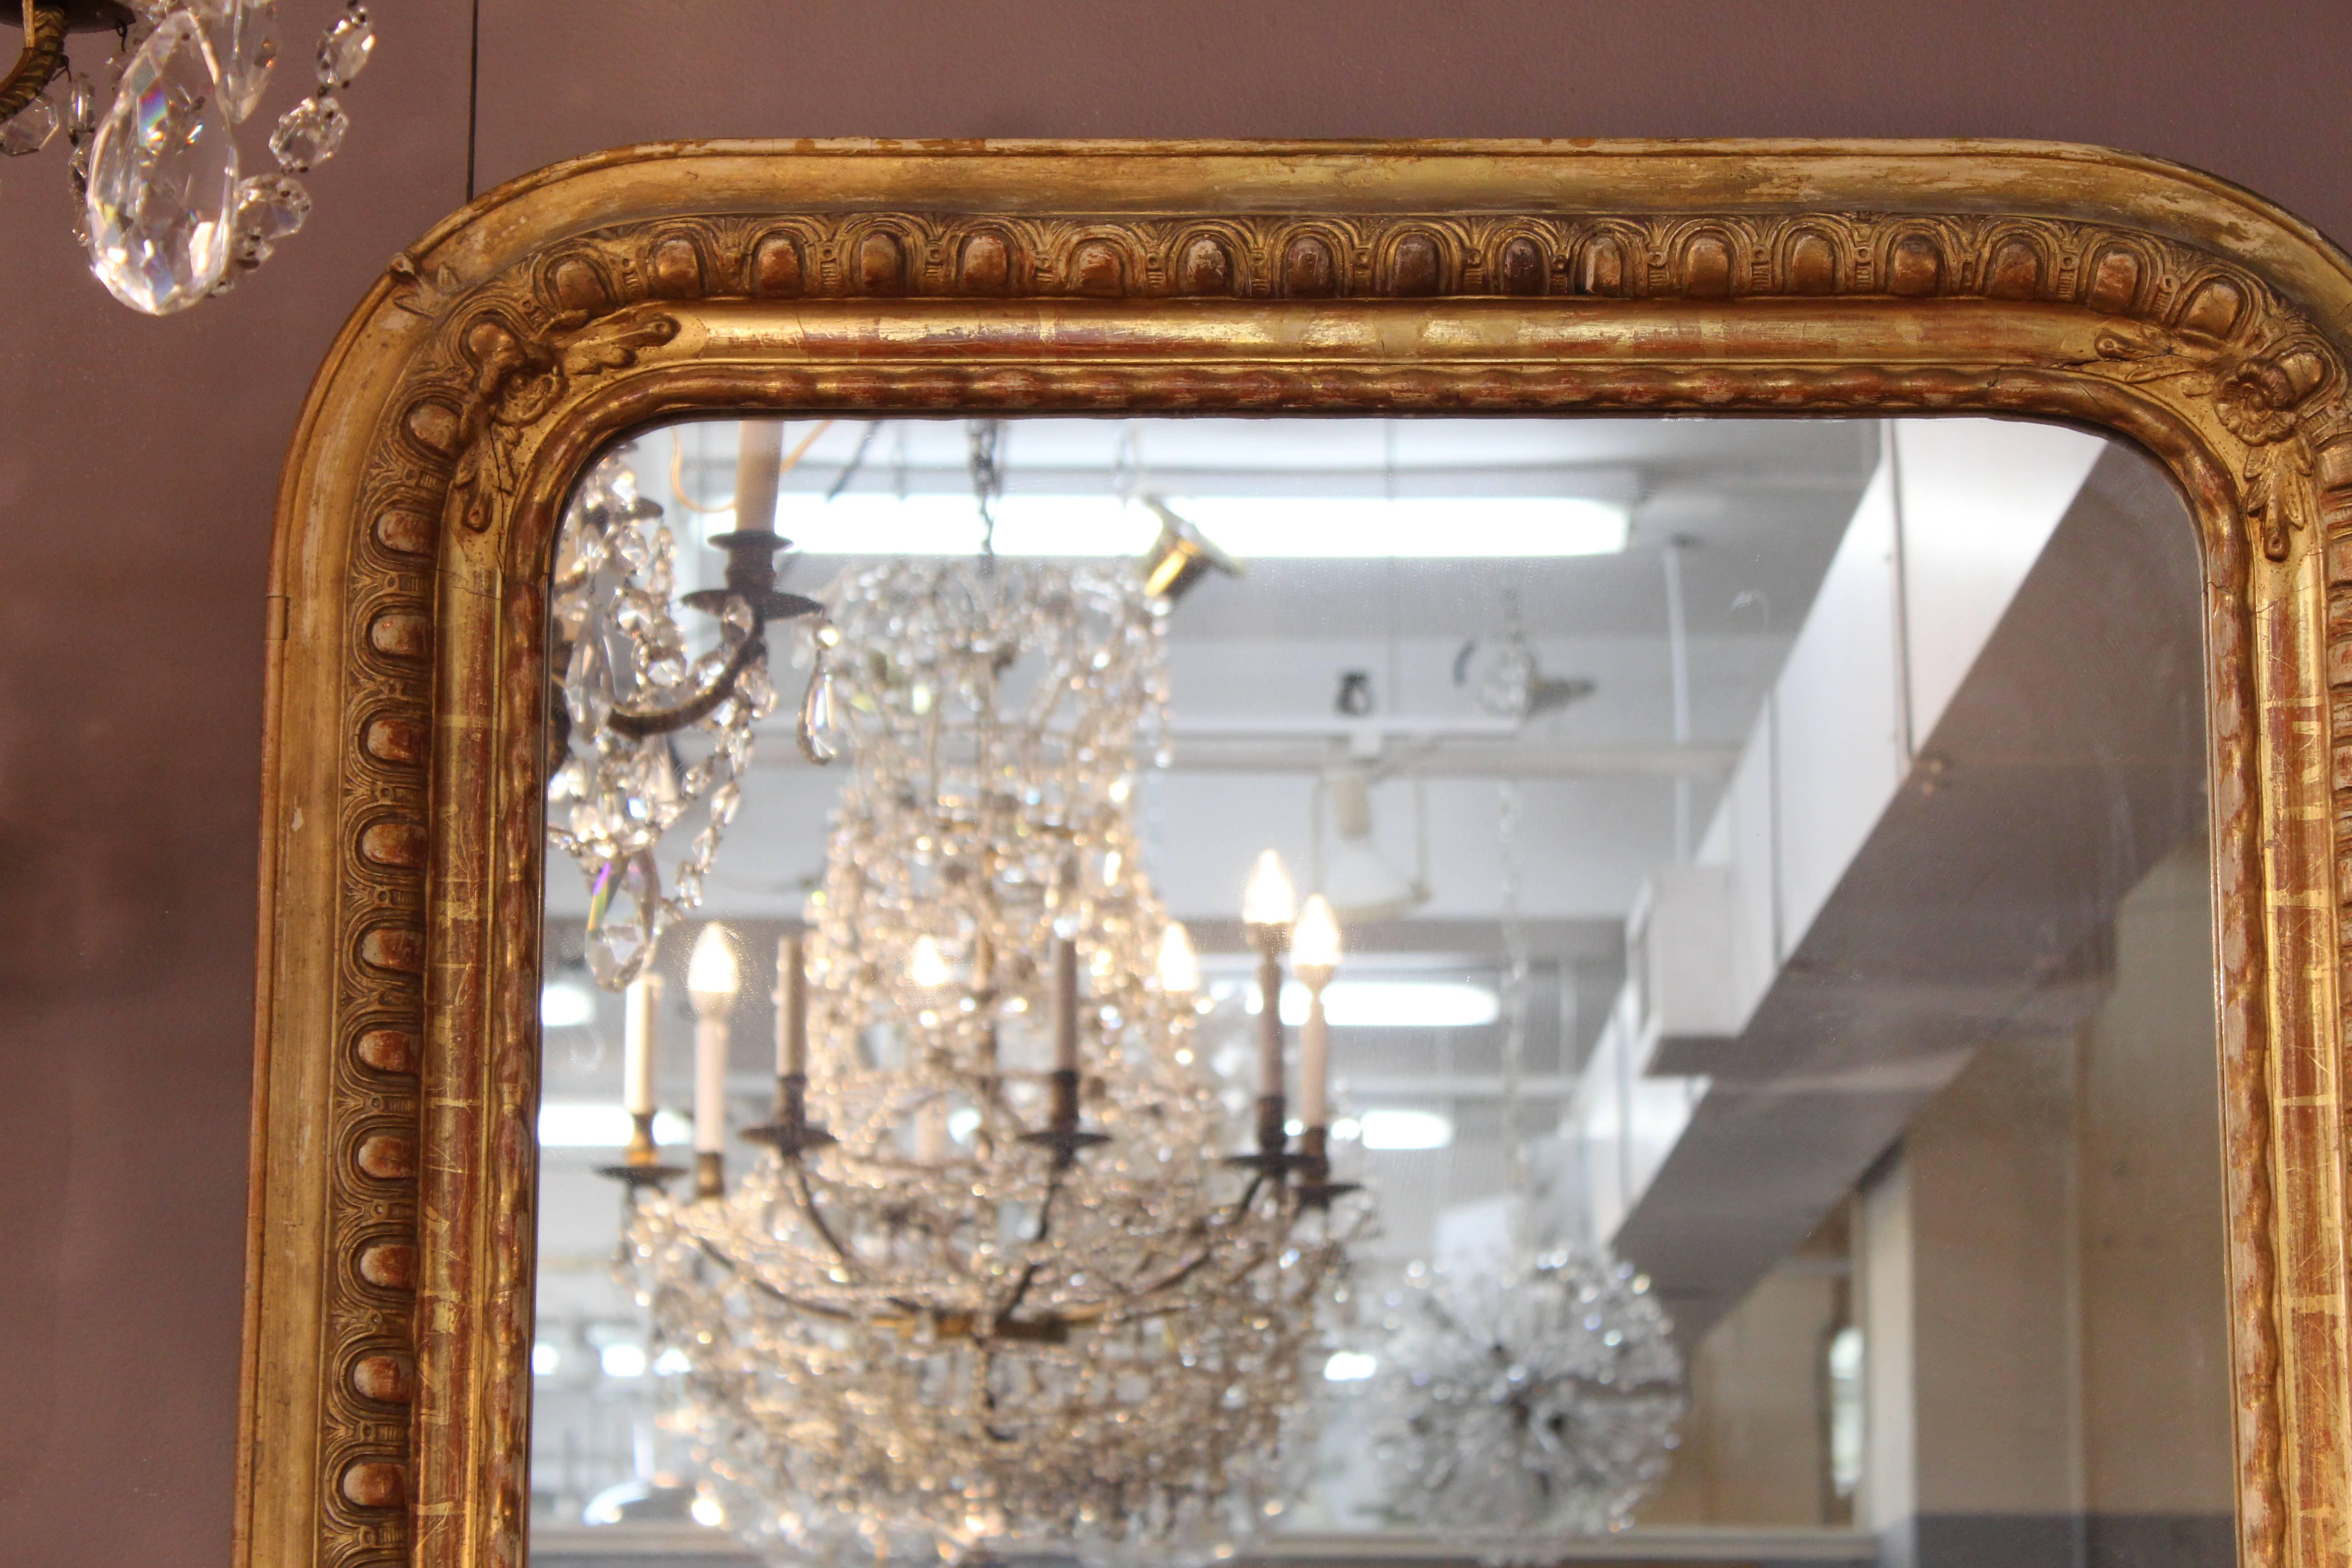 A French 19th century giltwood mirror produced during the reign of Louis-Philippe. The frame features refined egg-and-dart molding. Despite wear appropriate to age and use, the piece is in good condition.